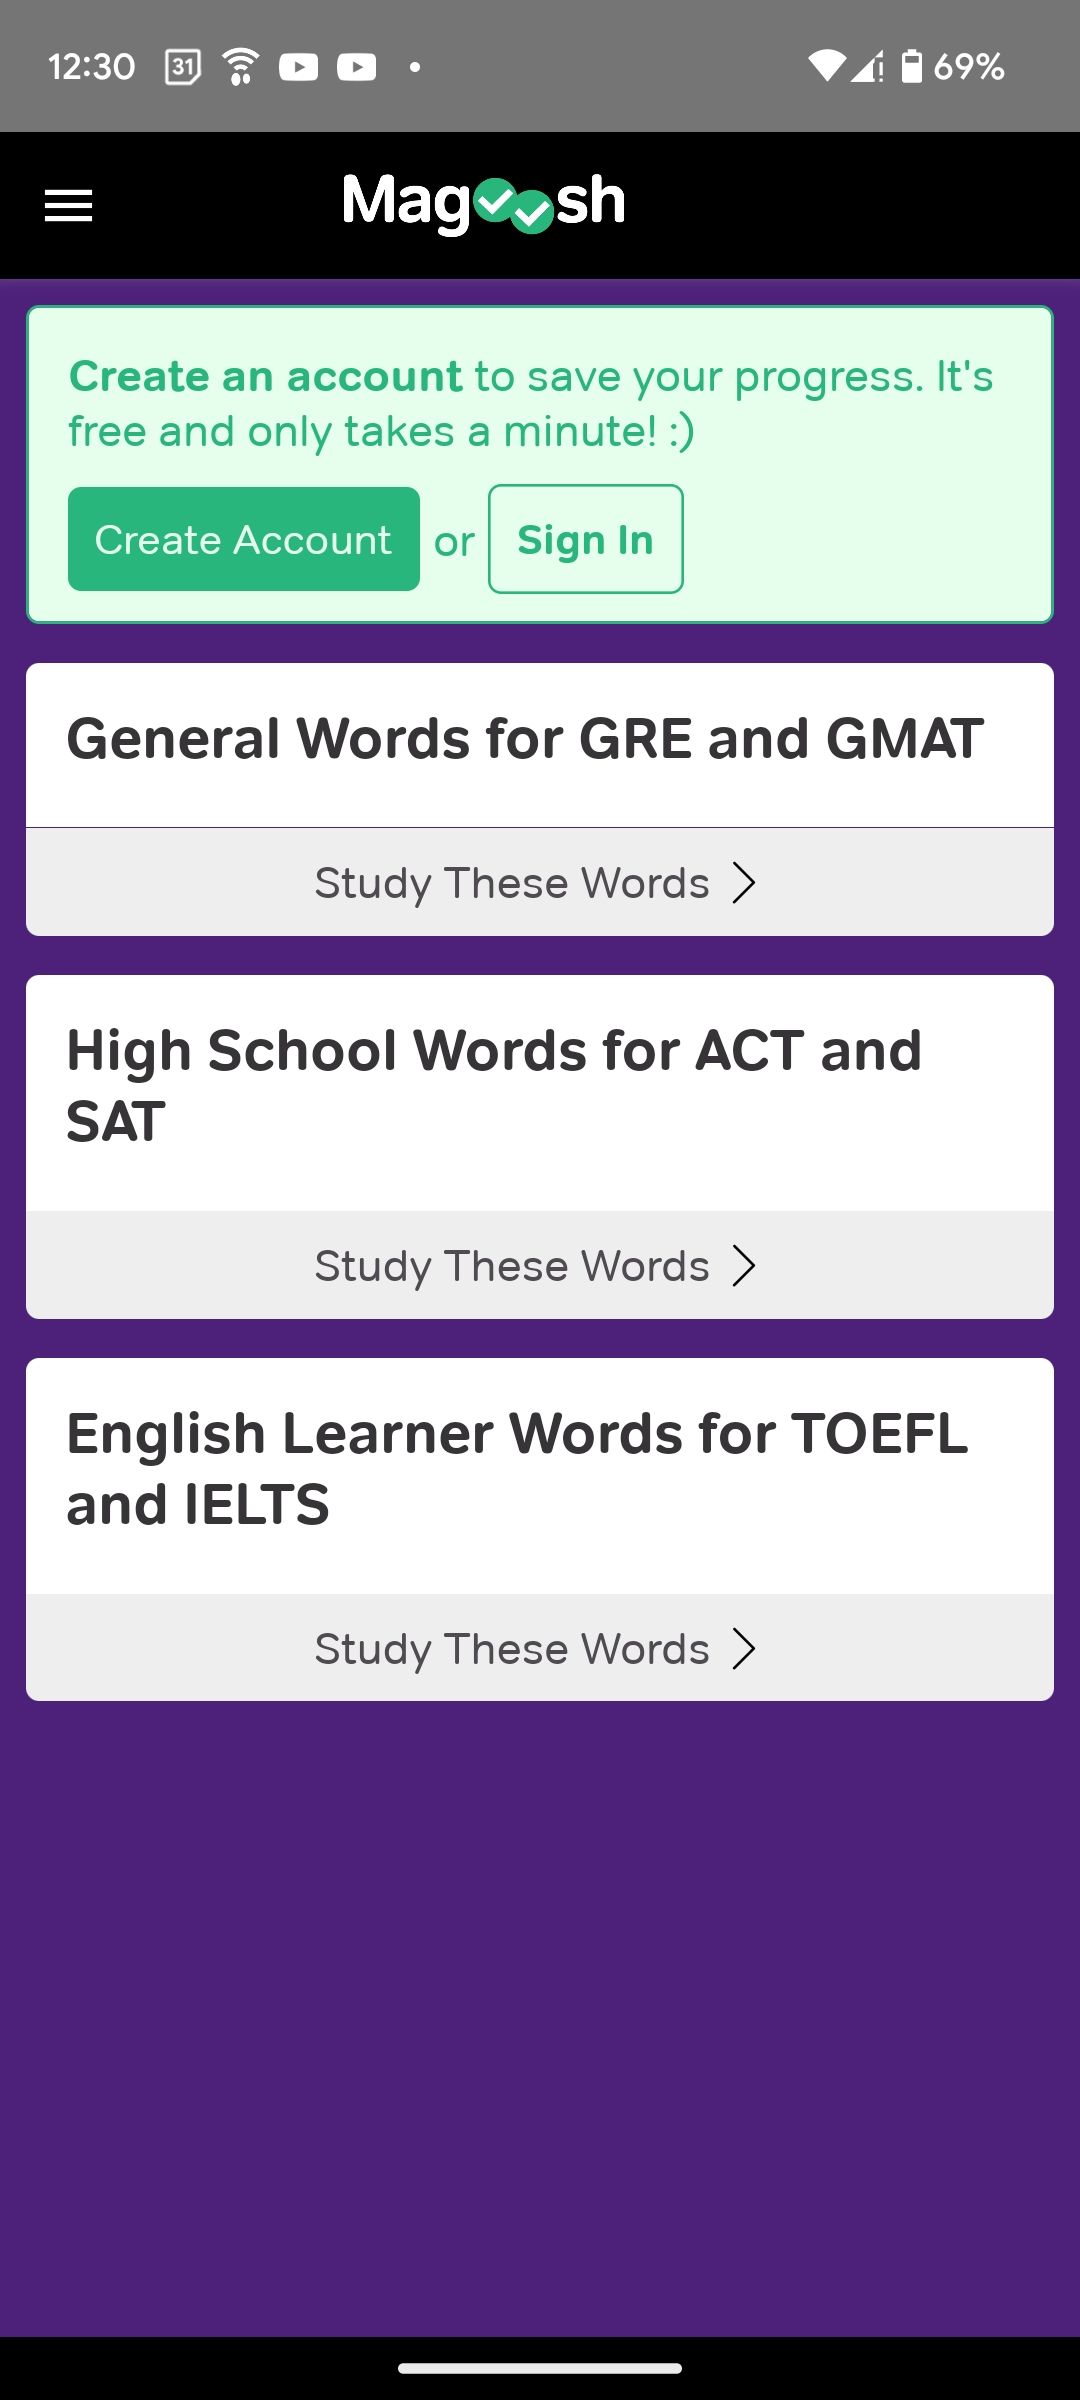 Vocabulary Builder learning options in the app's home page